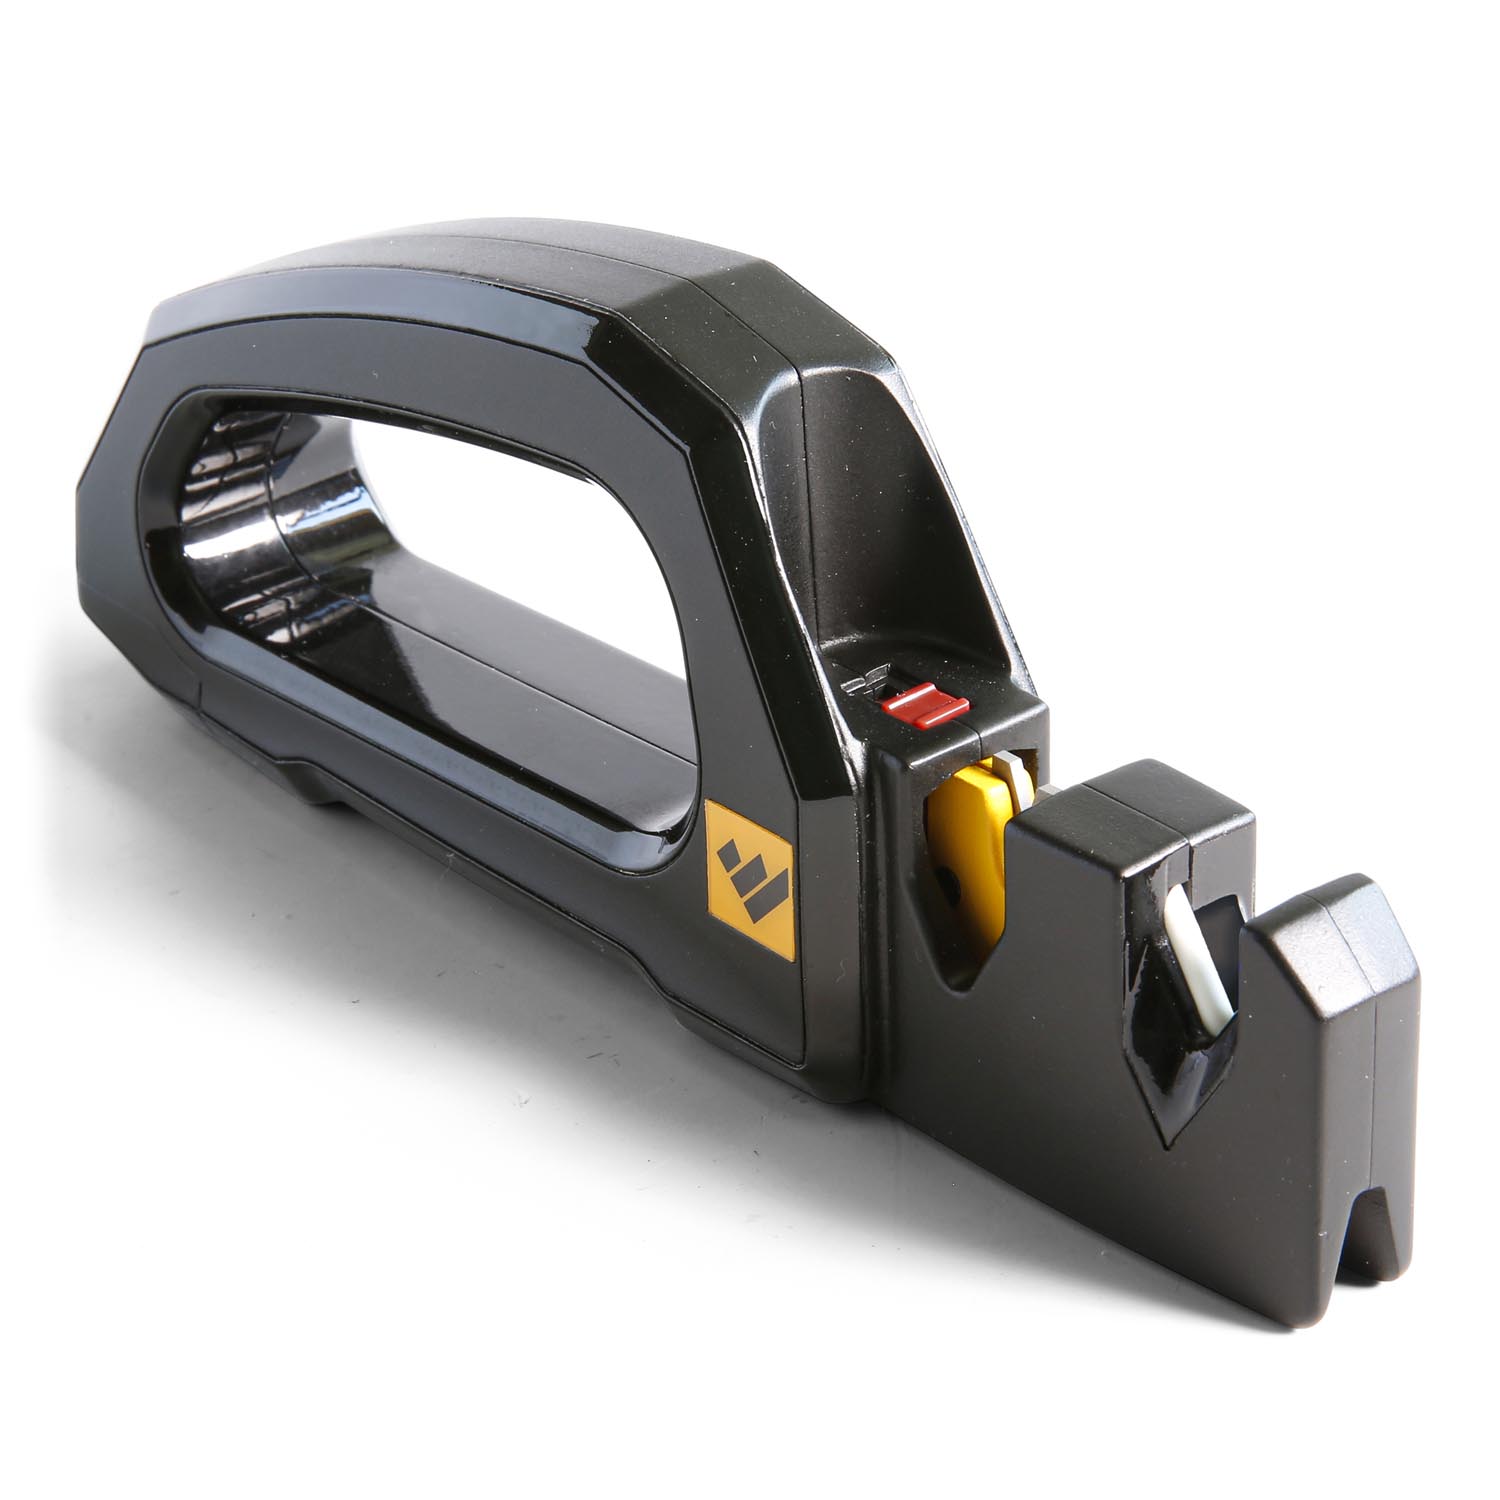 Sharpener for Shears, Scissors and Cutters by Work Sharp